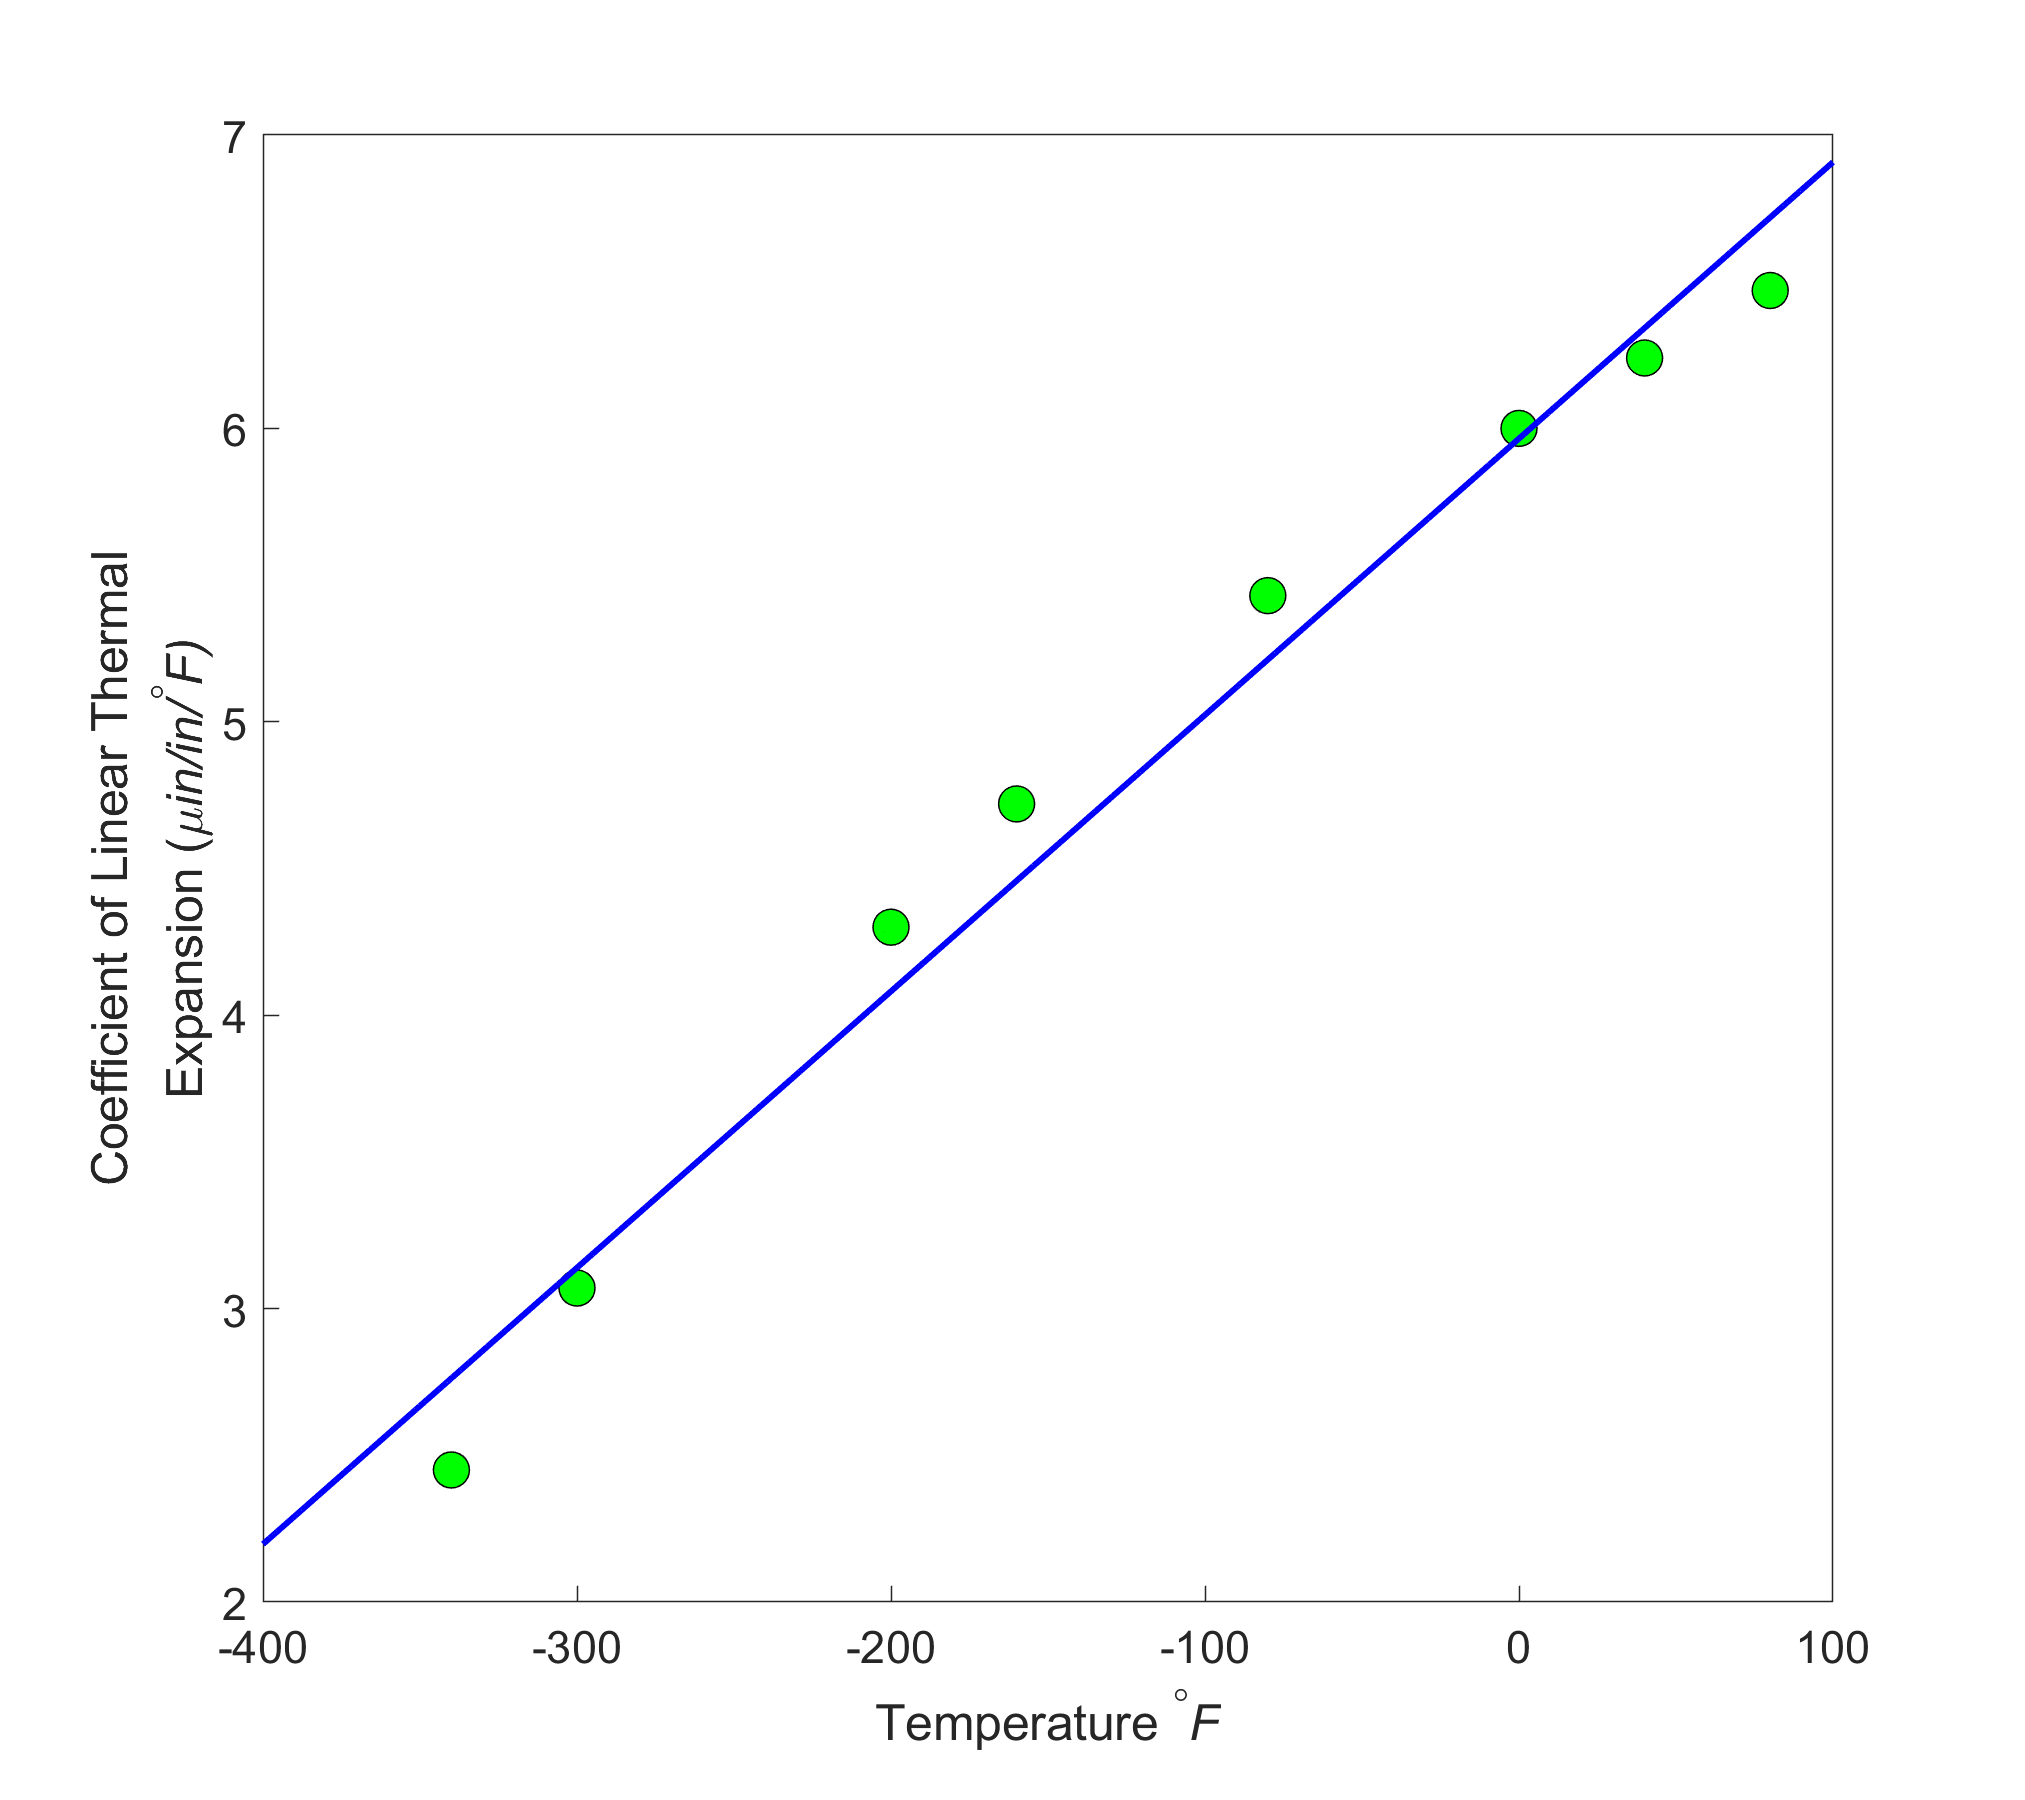 Linear regression model of coefficient of linear thermal expansion for cast steel as a function of temperature, where a straight line of best fit is drawn through the data points.